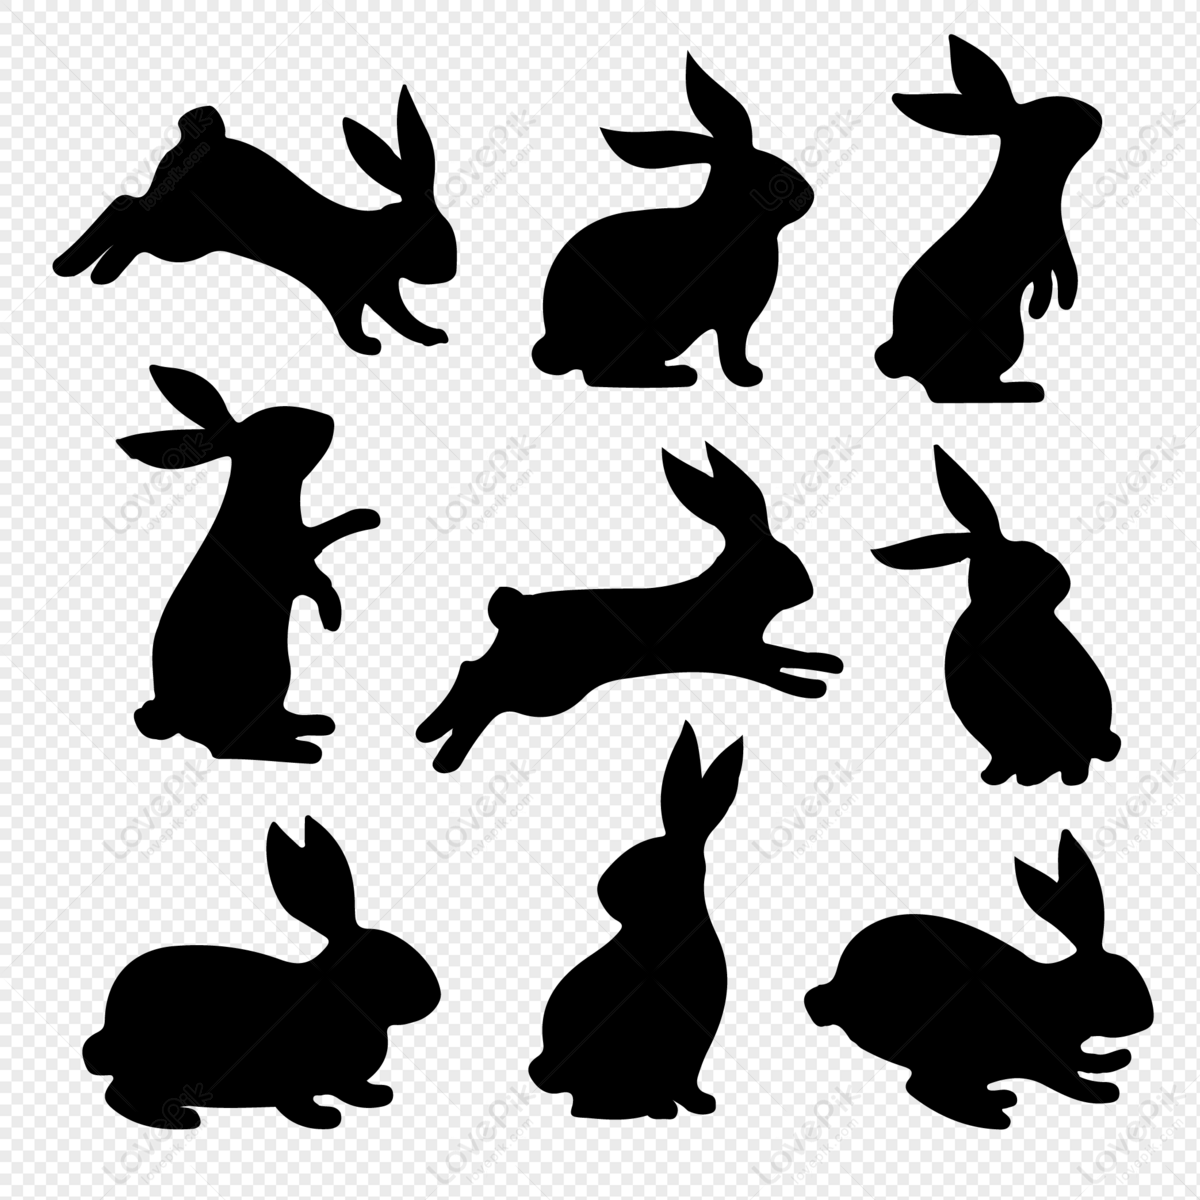 Vector silhouette rabbit 2, rabbit silhoutte, 2, counseling png transparent image